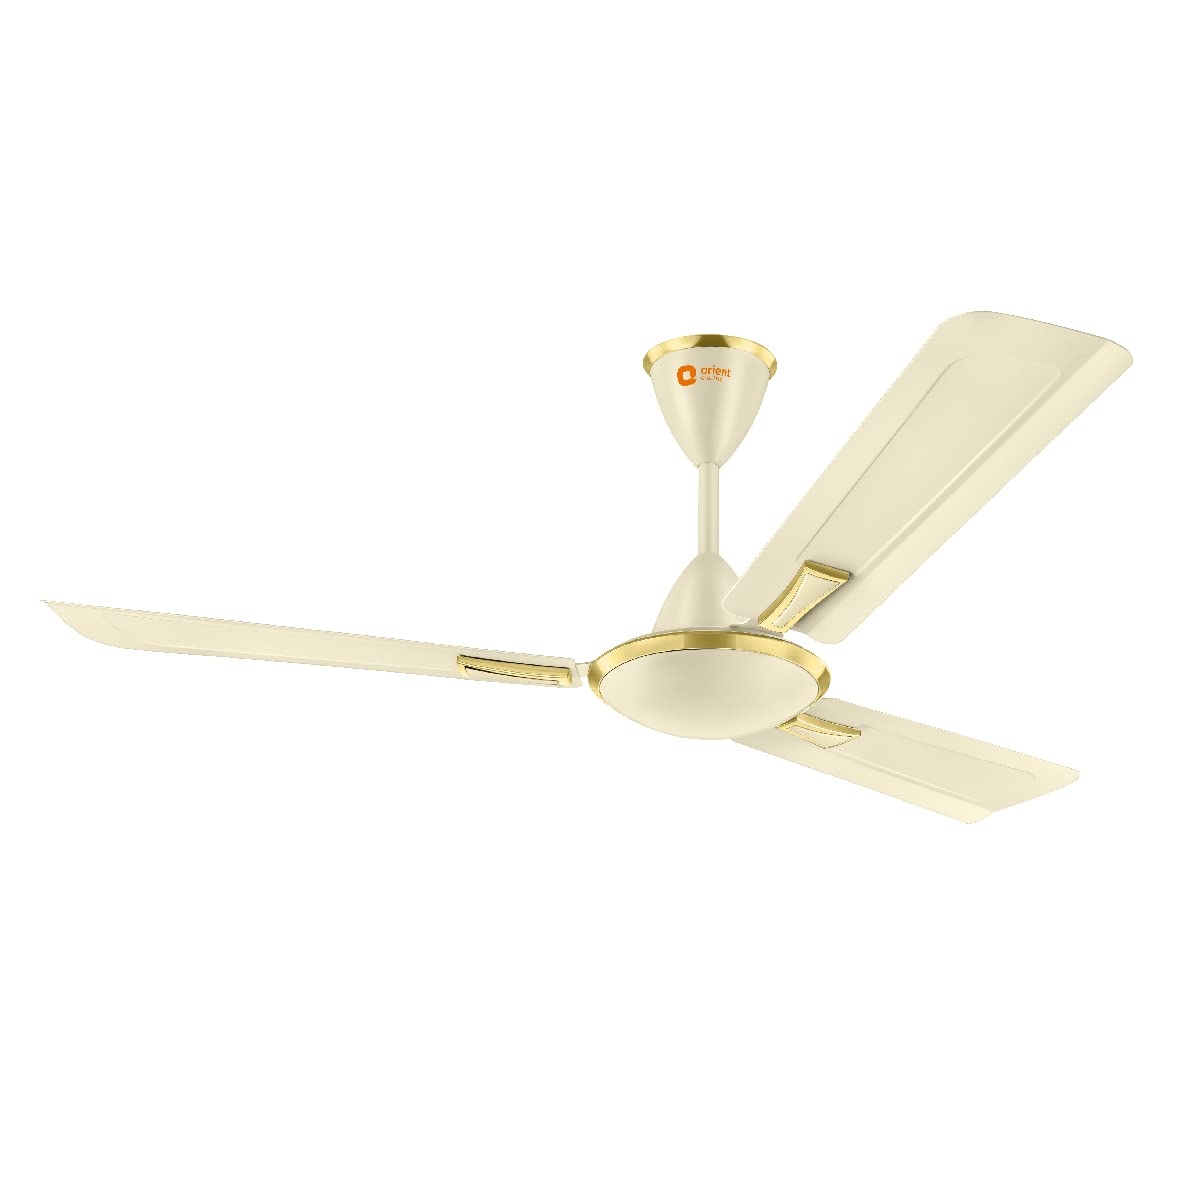 Orient Electric Adena Prime 1200mm Decorative BEE Star Rated Ceiling Fan (White)